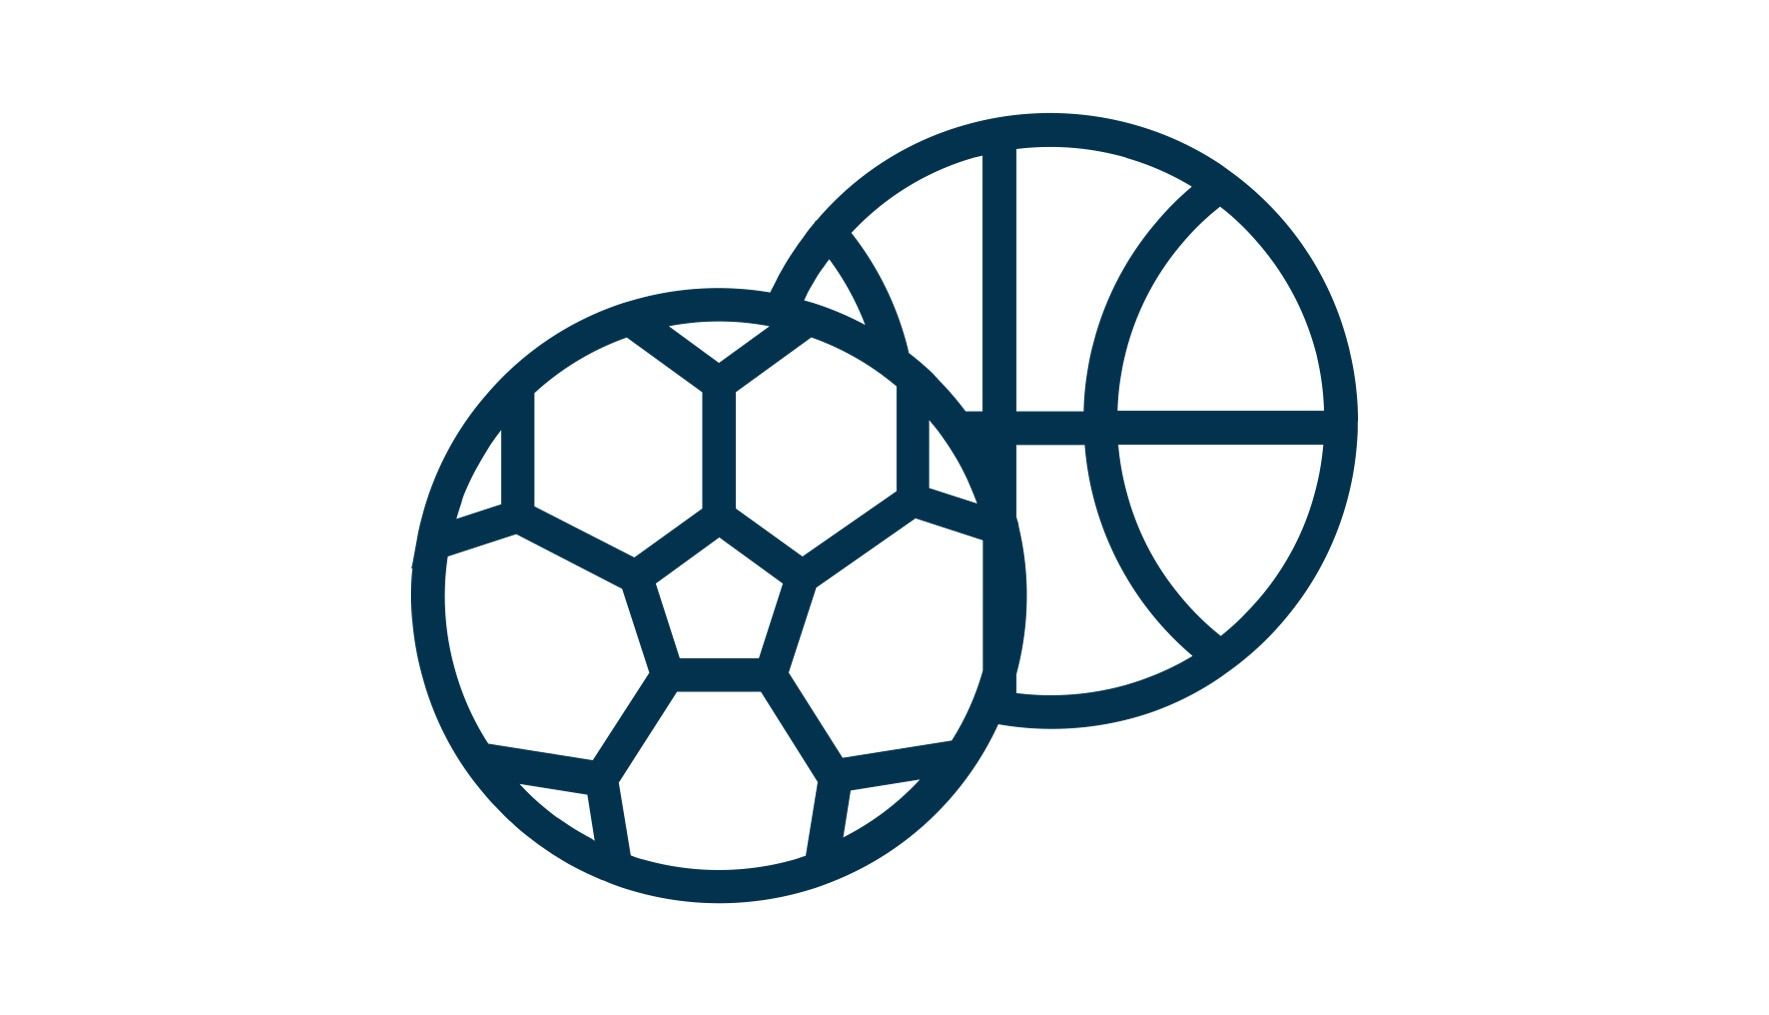 Blue lineart of a soccer ball and basketball